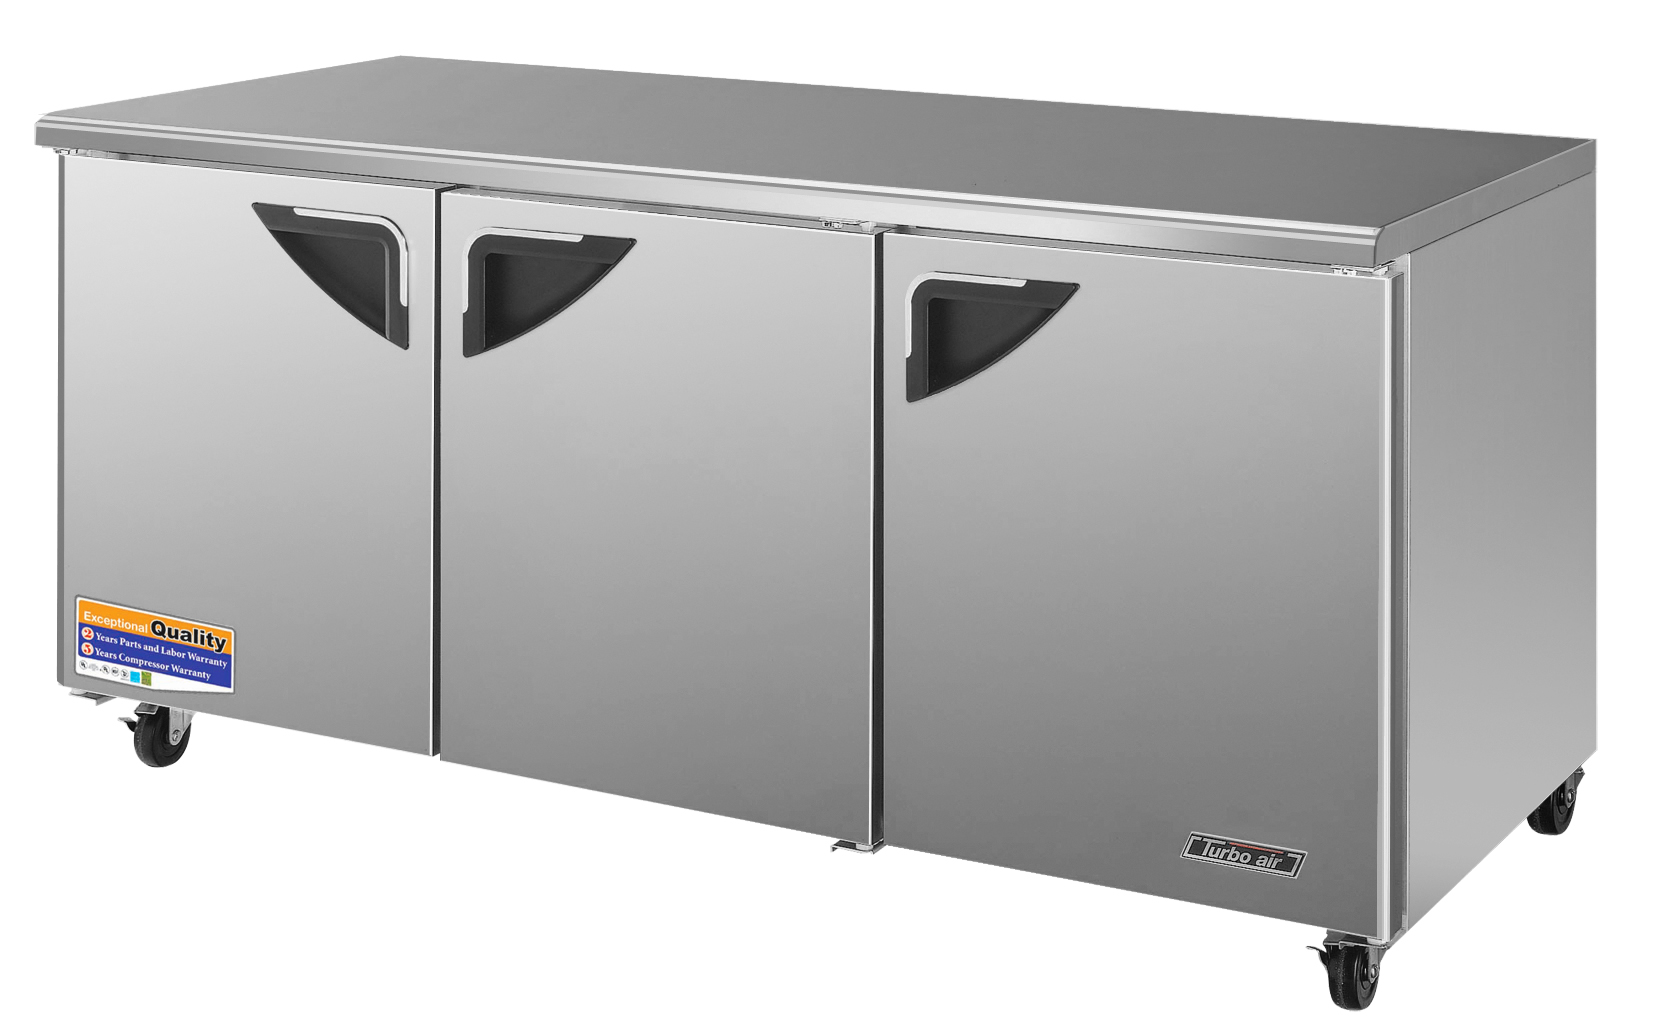 Super Deluxe Series Undercounter Refrigerator, 3-section